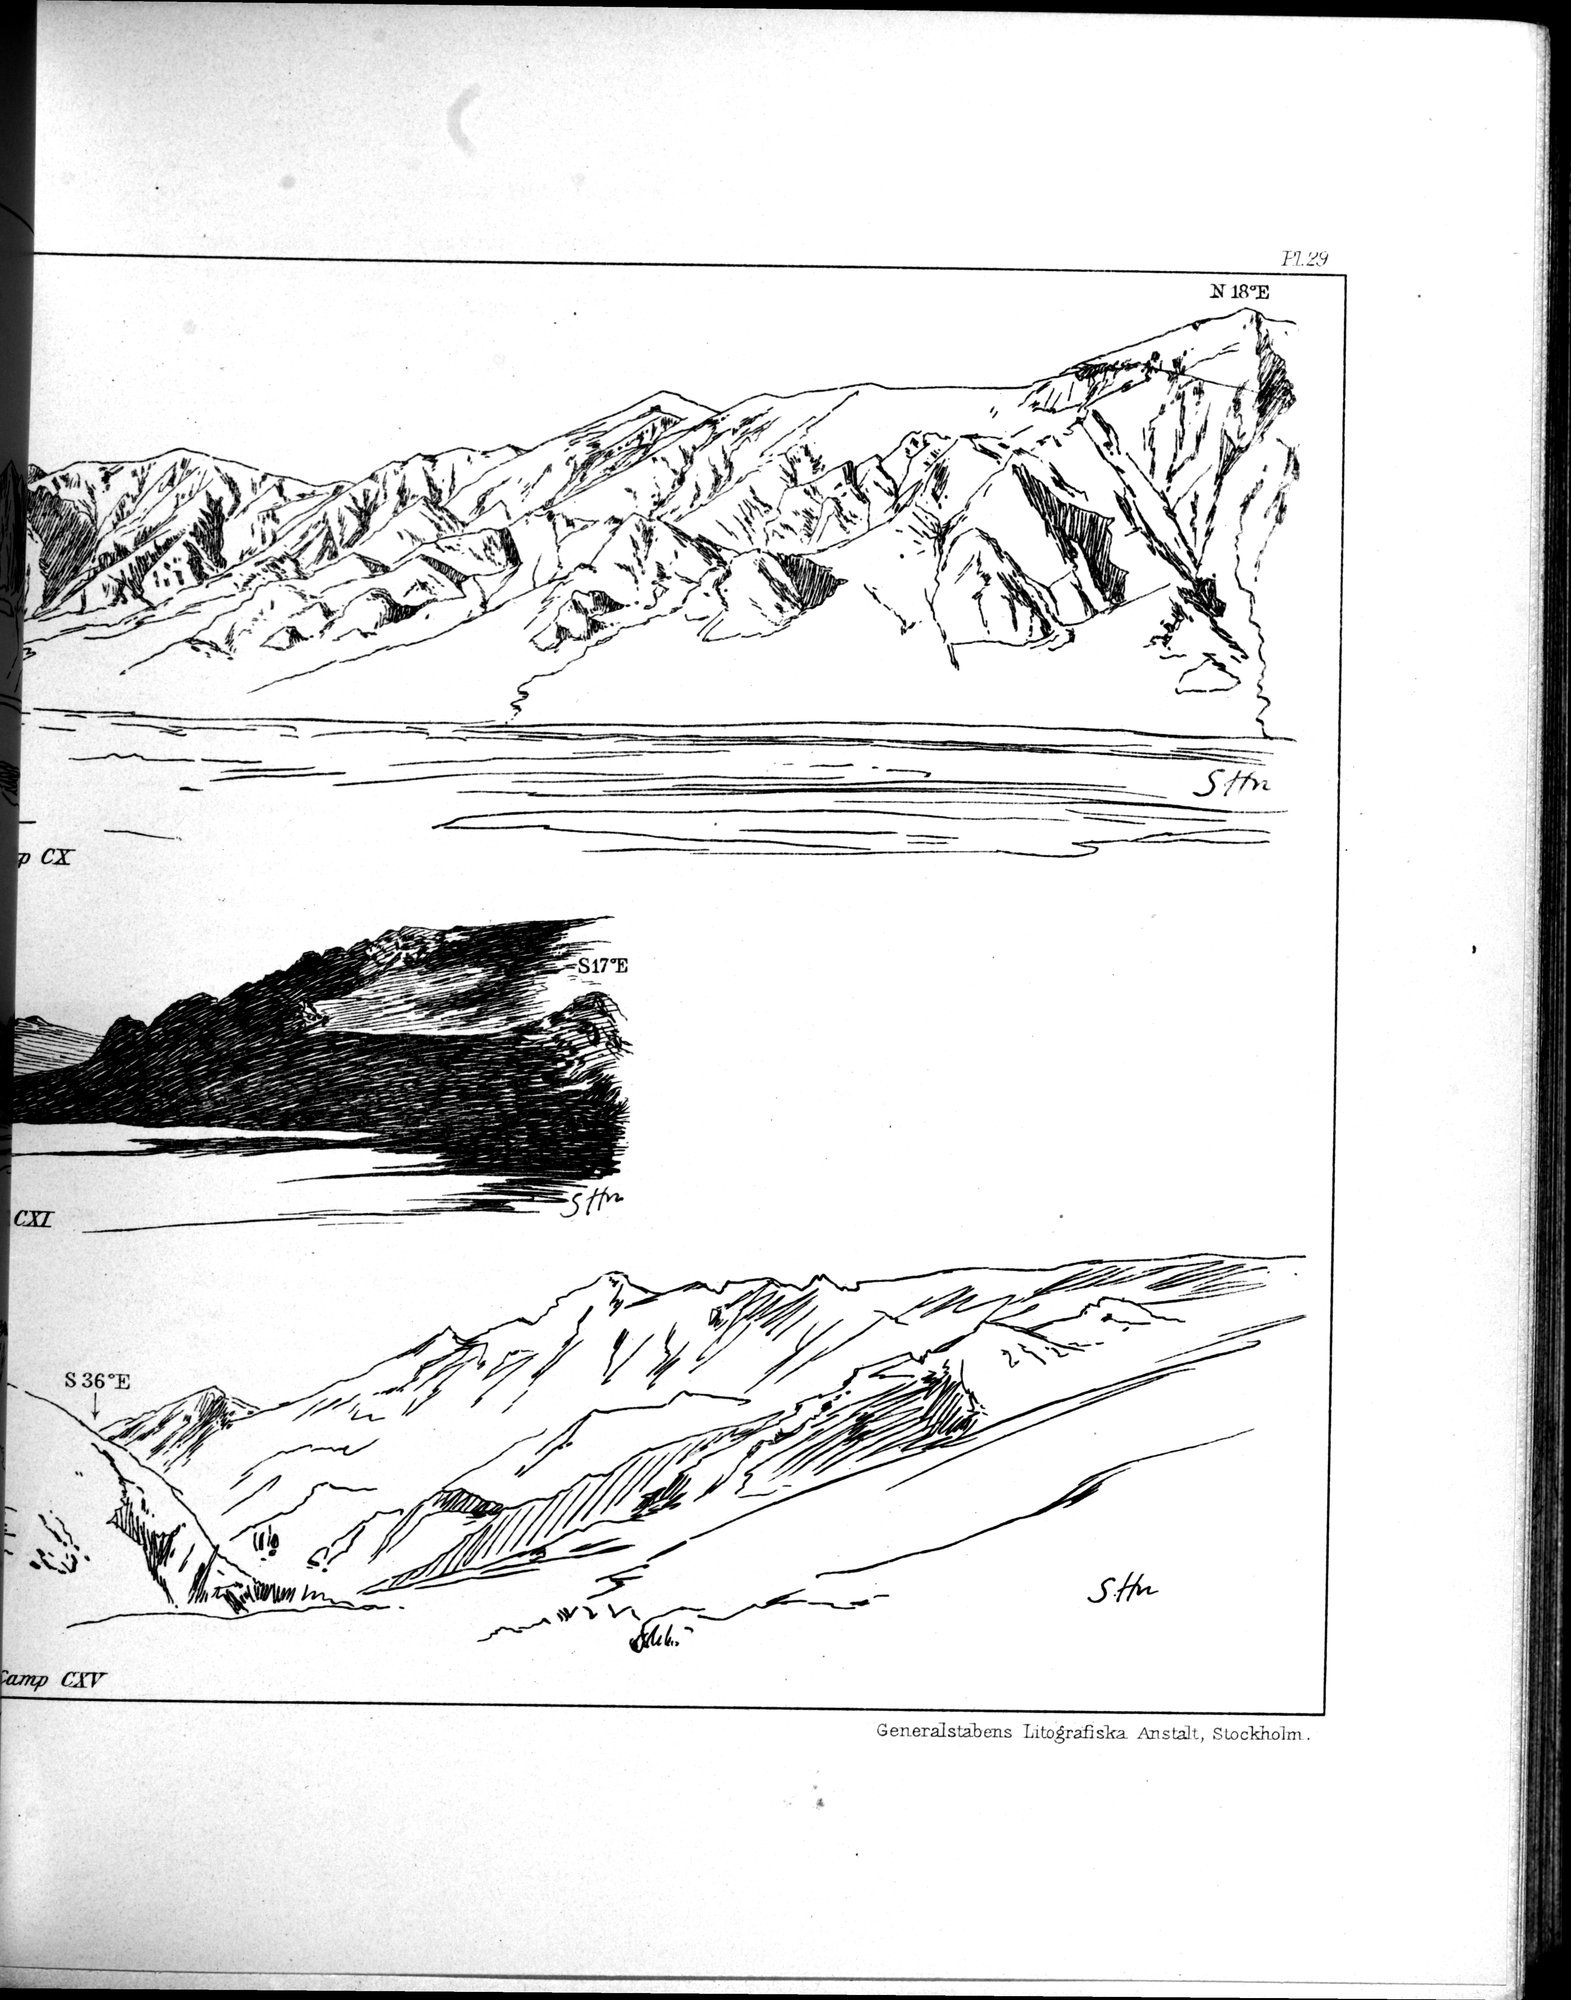 Scientific Results of a Journey in Central Asia, 1899-1902 : vol.4 / 253 ページ（白黒高解像度画像）